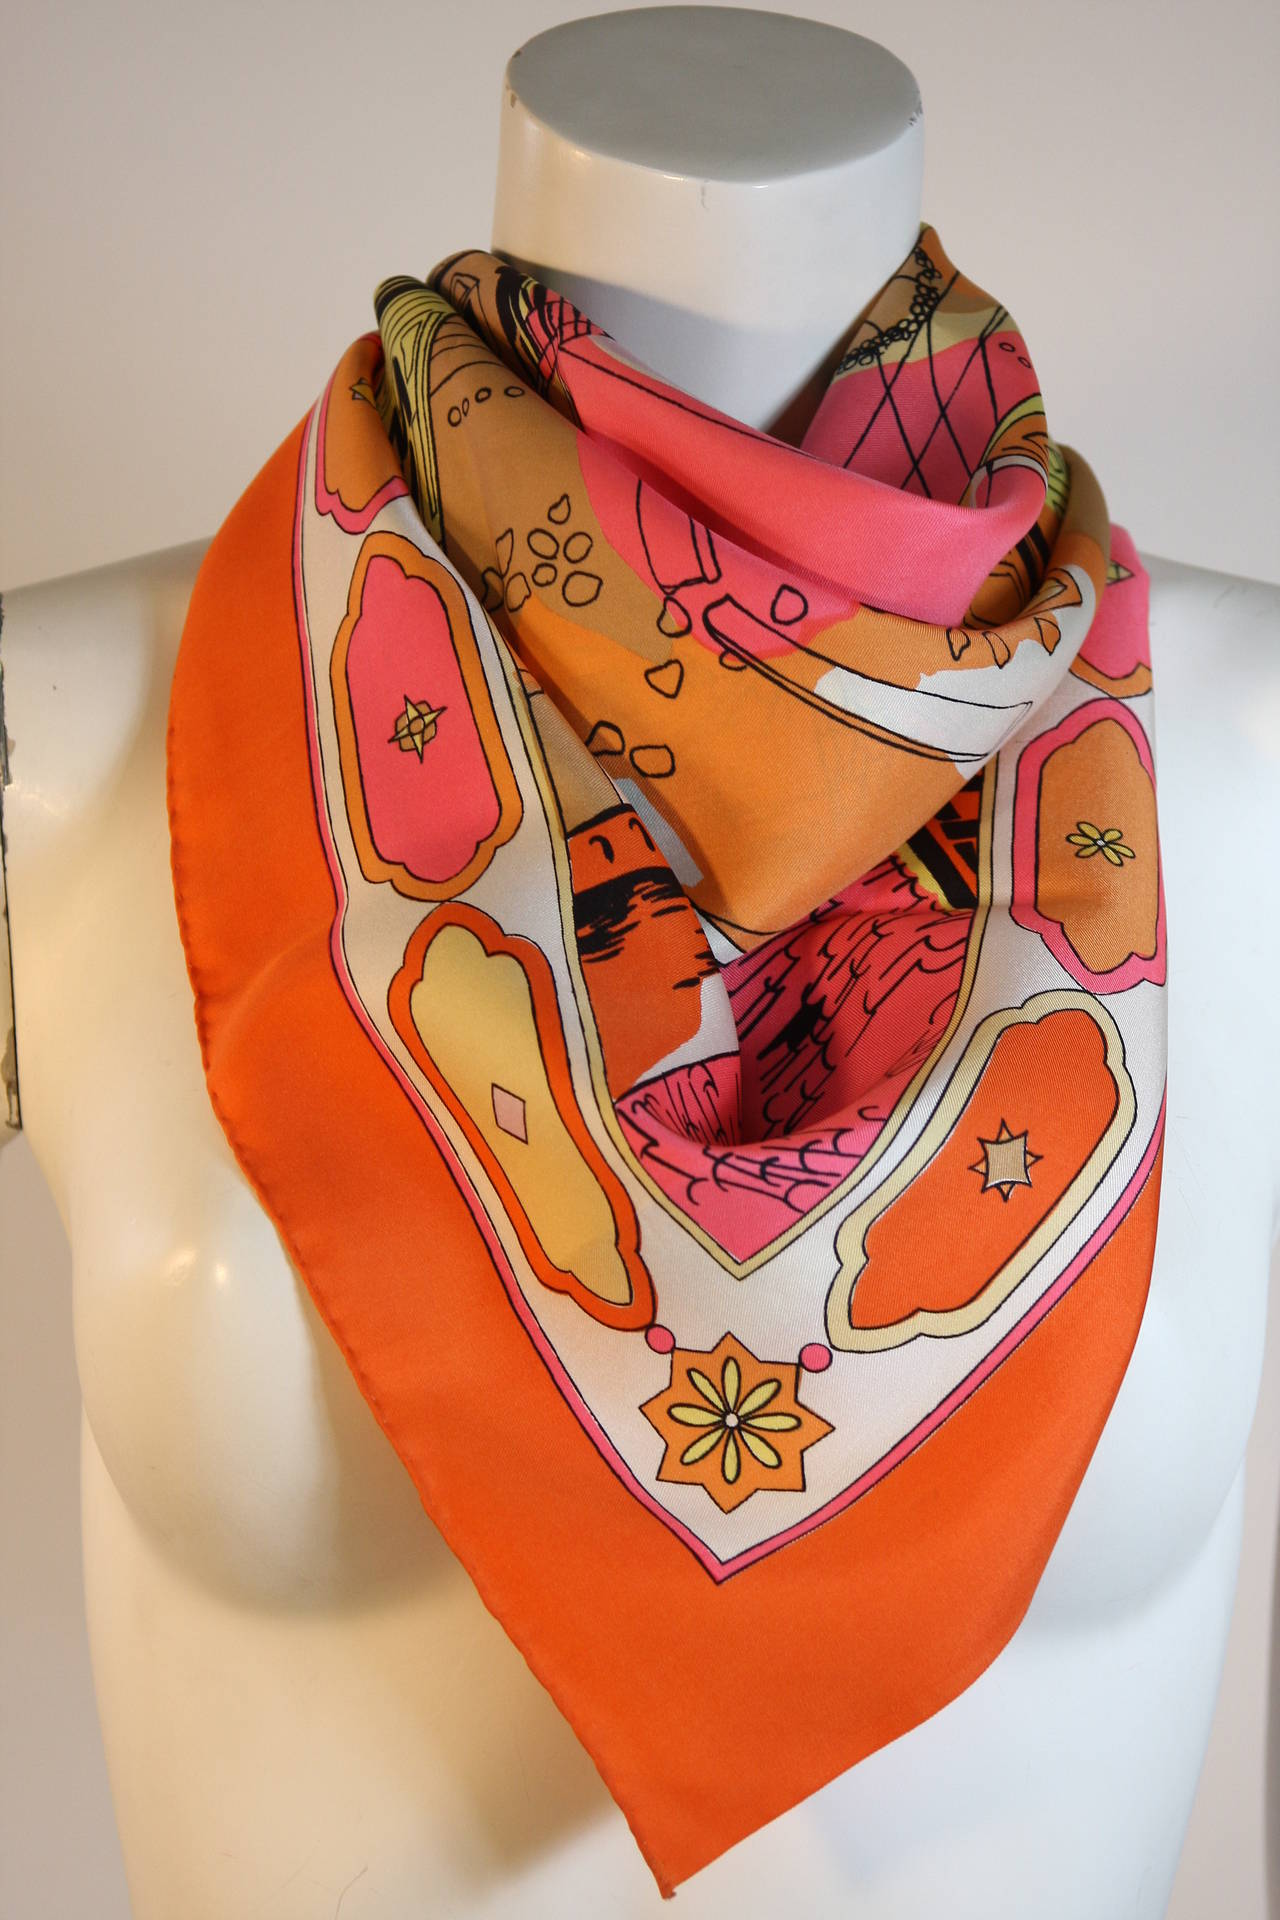 Gorgeous and rare Emilio Pucci Florentine citry scape in shades of orange, pink, and black with cream border detail print. In excellent condition with little  signs of use.

Measurements-
36 x 35

Please note only 2 edges are hand rolled which